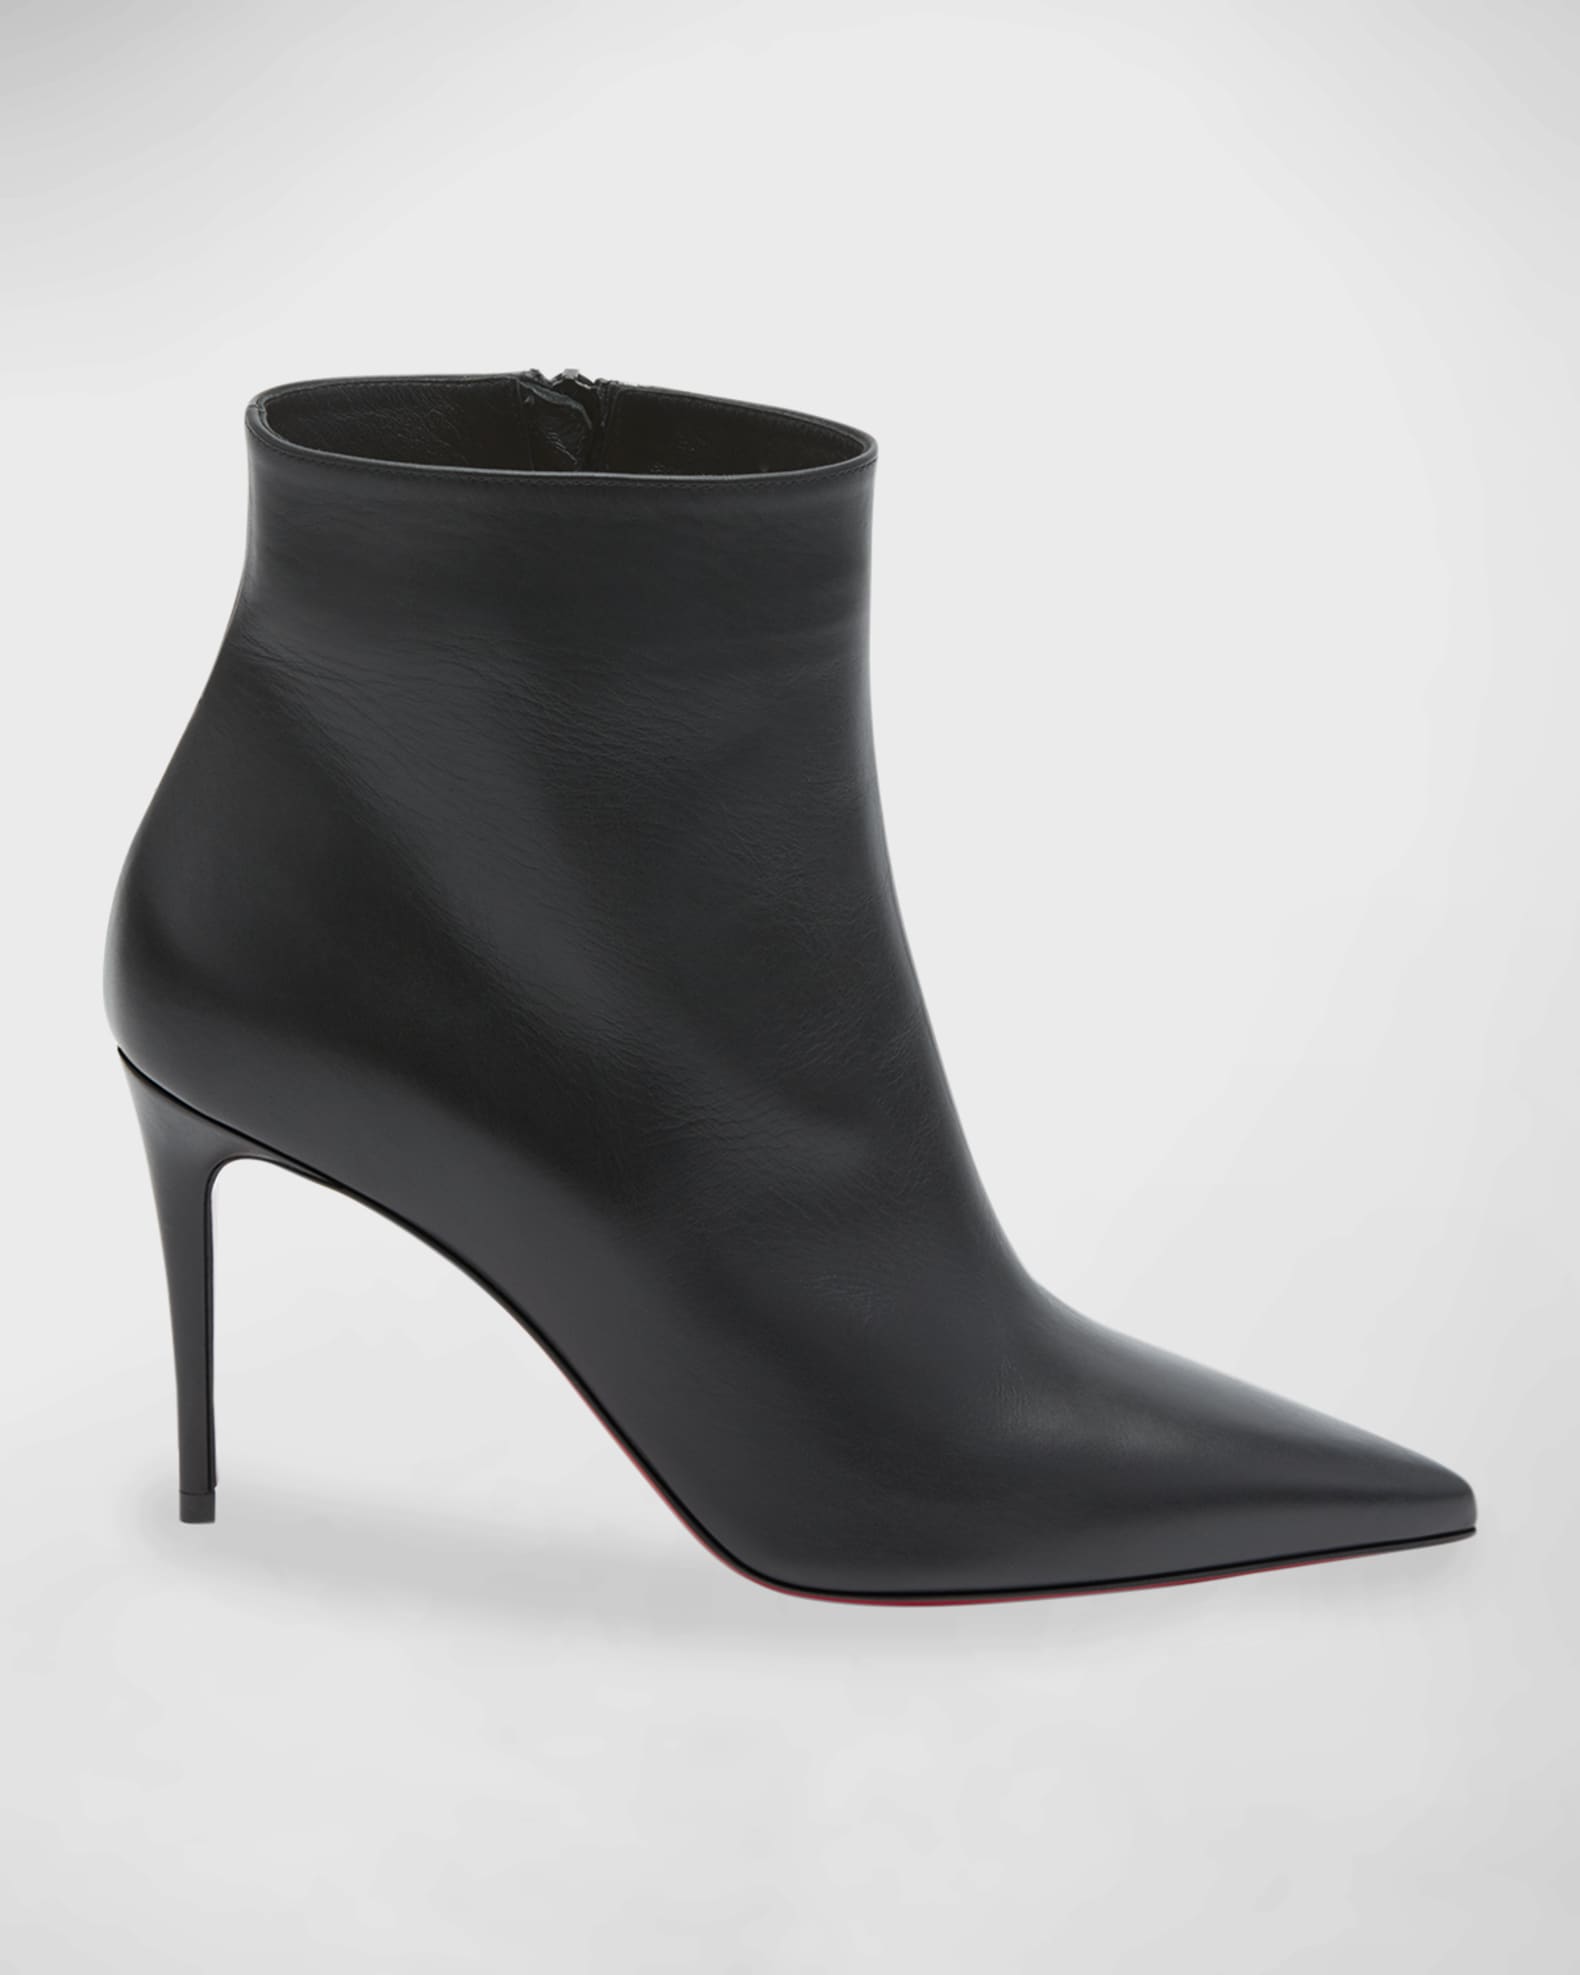 Christian Louboutin So Kate Leather Red Sole Booties | Neiman Marcus